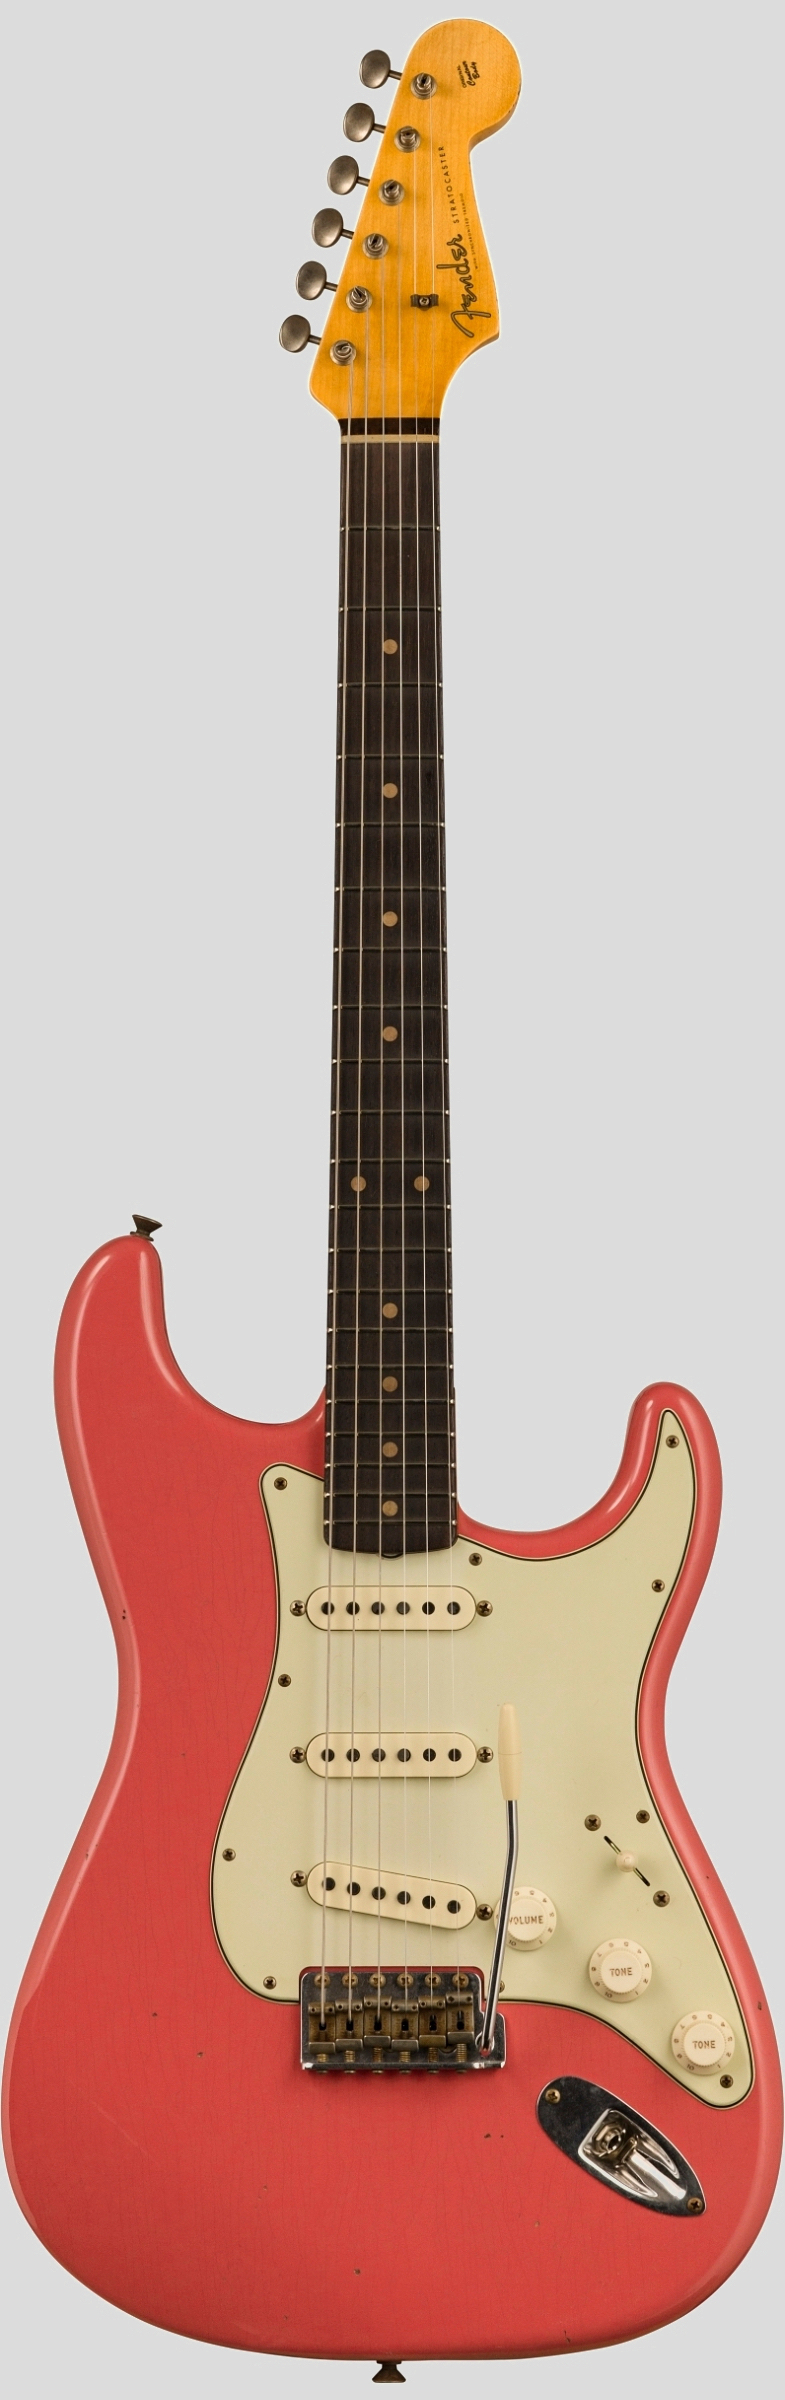 Fender Custom Shop Limited Edition 59 Stratocaster Super Faded Aged Fiesta Red J.Relic 1